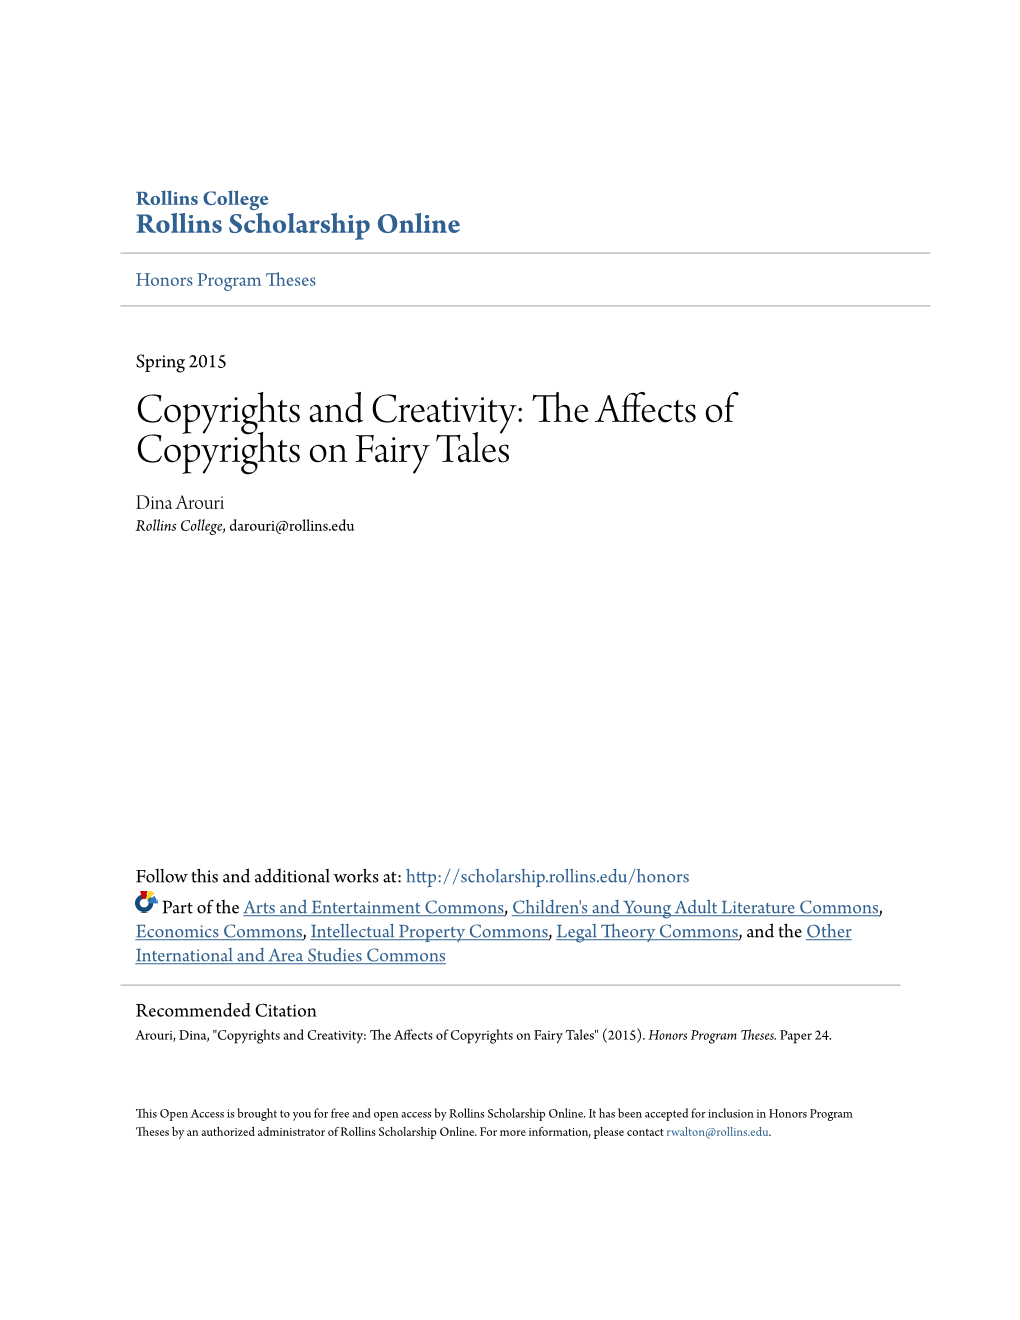 Copyrights and Creativity: the Affects of Copyrights on Fairy Tales Dina Arouri Rollins College, Darouri@Rollins.Edu